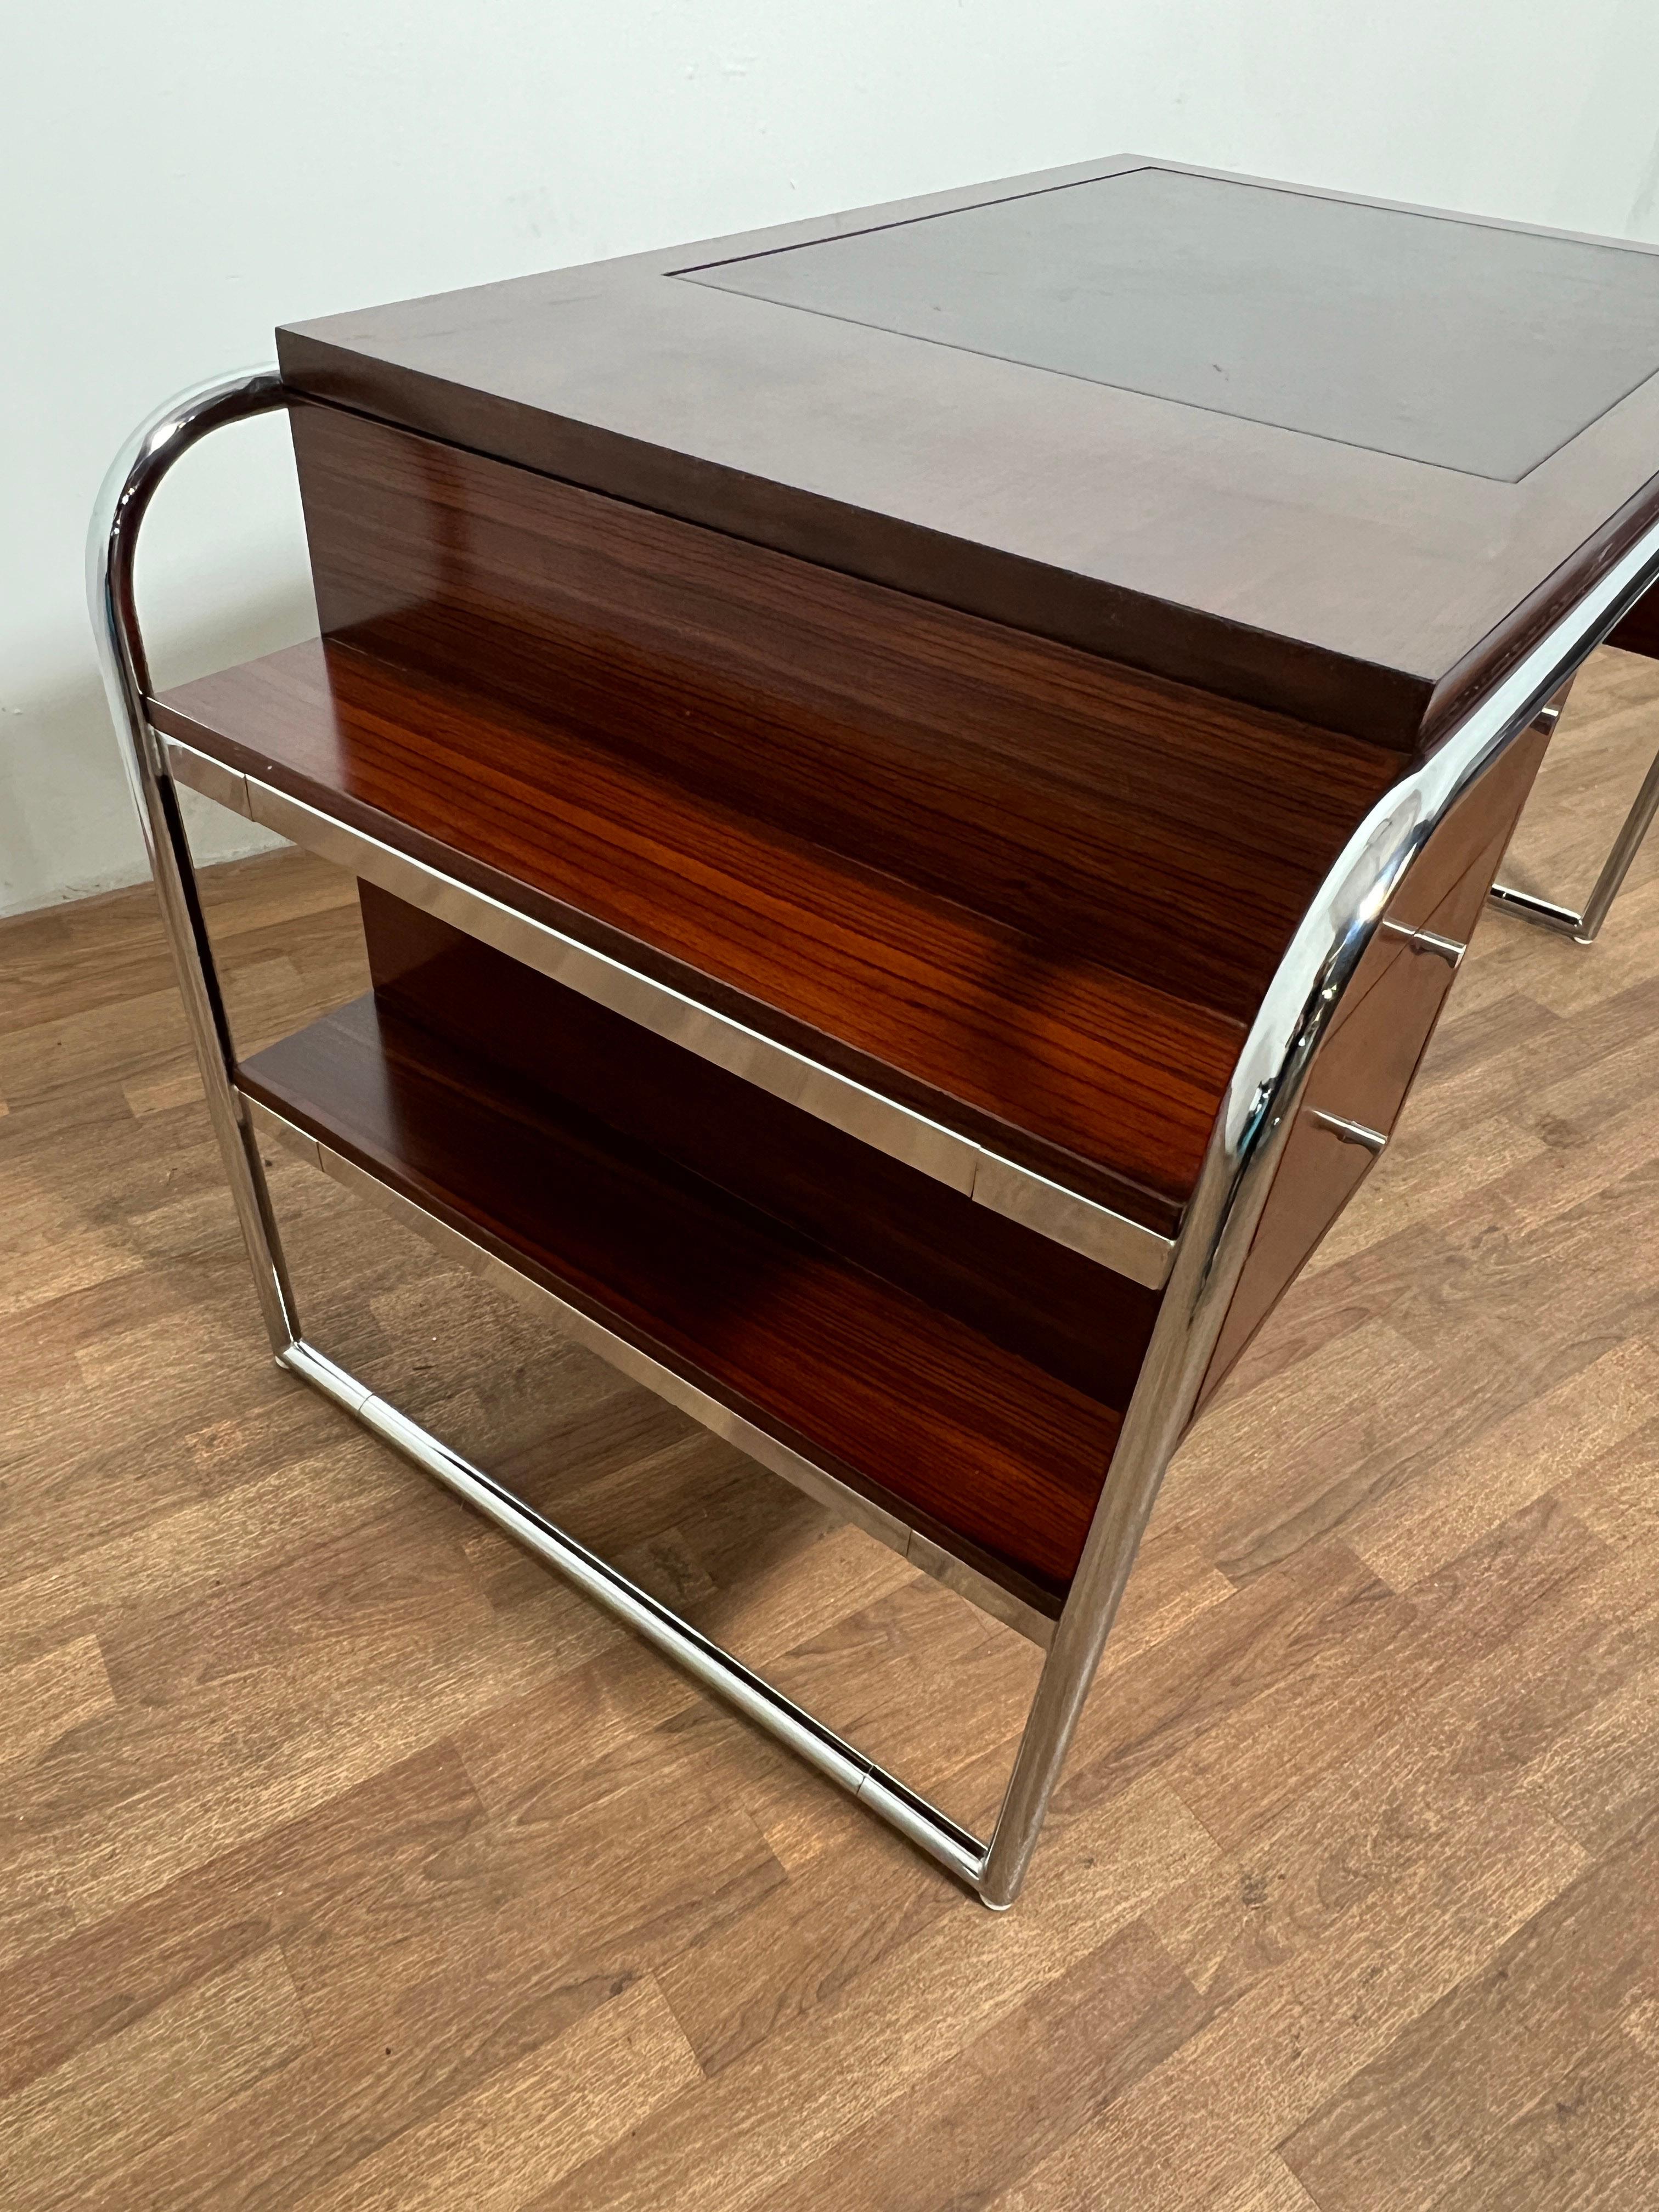 Ralph Lauren Bauhaus Inspired Desk in Wenge, Chrome and Leather 3